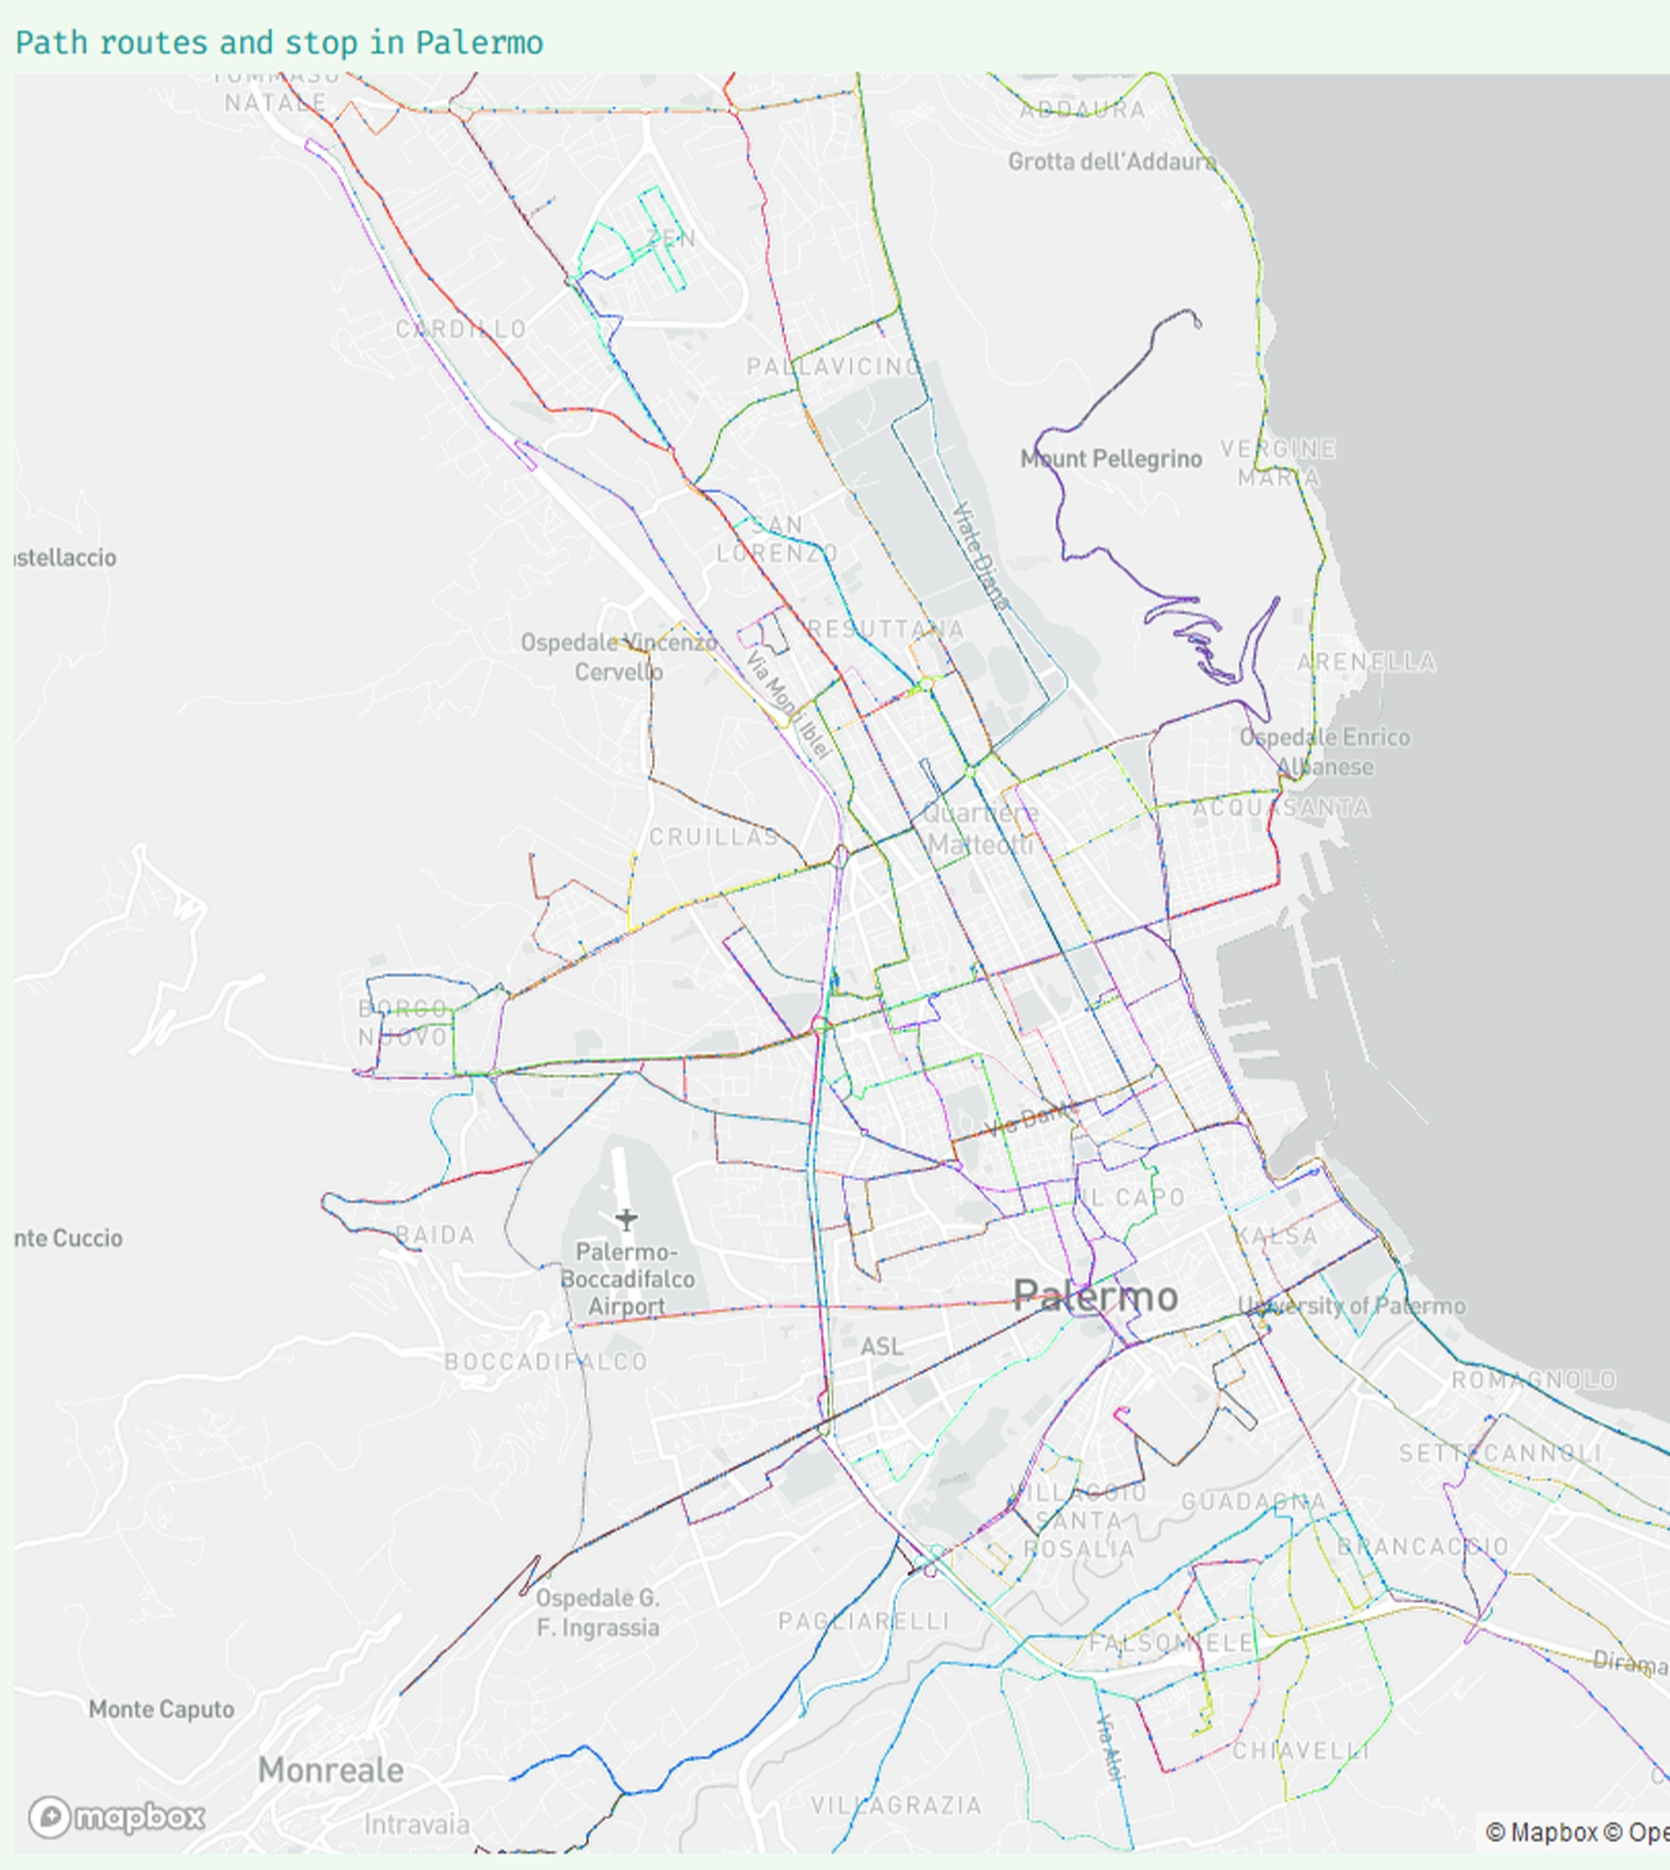 animated path of bus and lollipop about bus routes